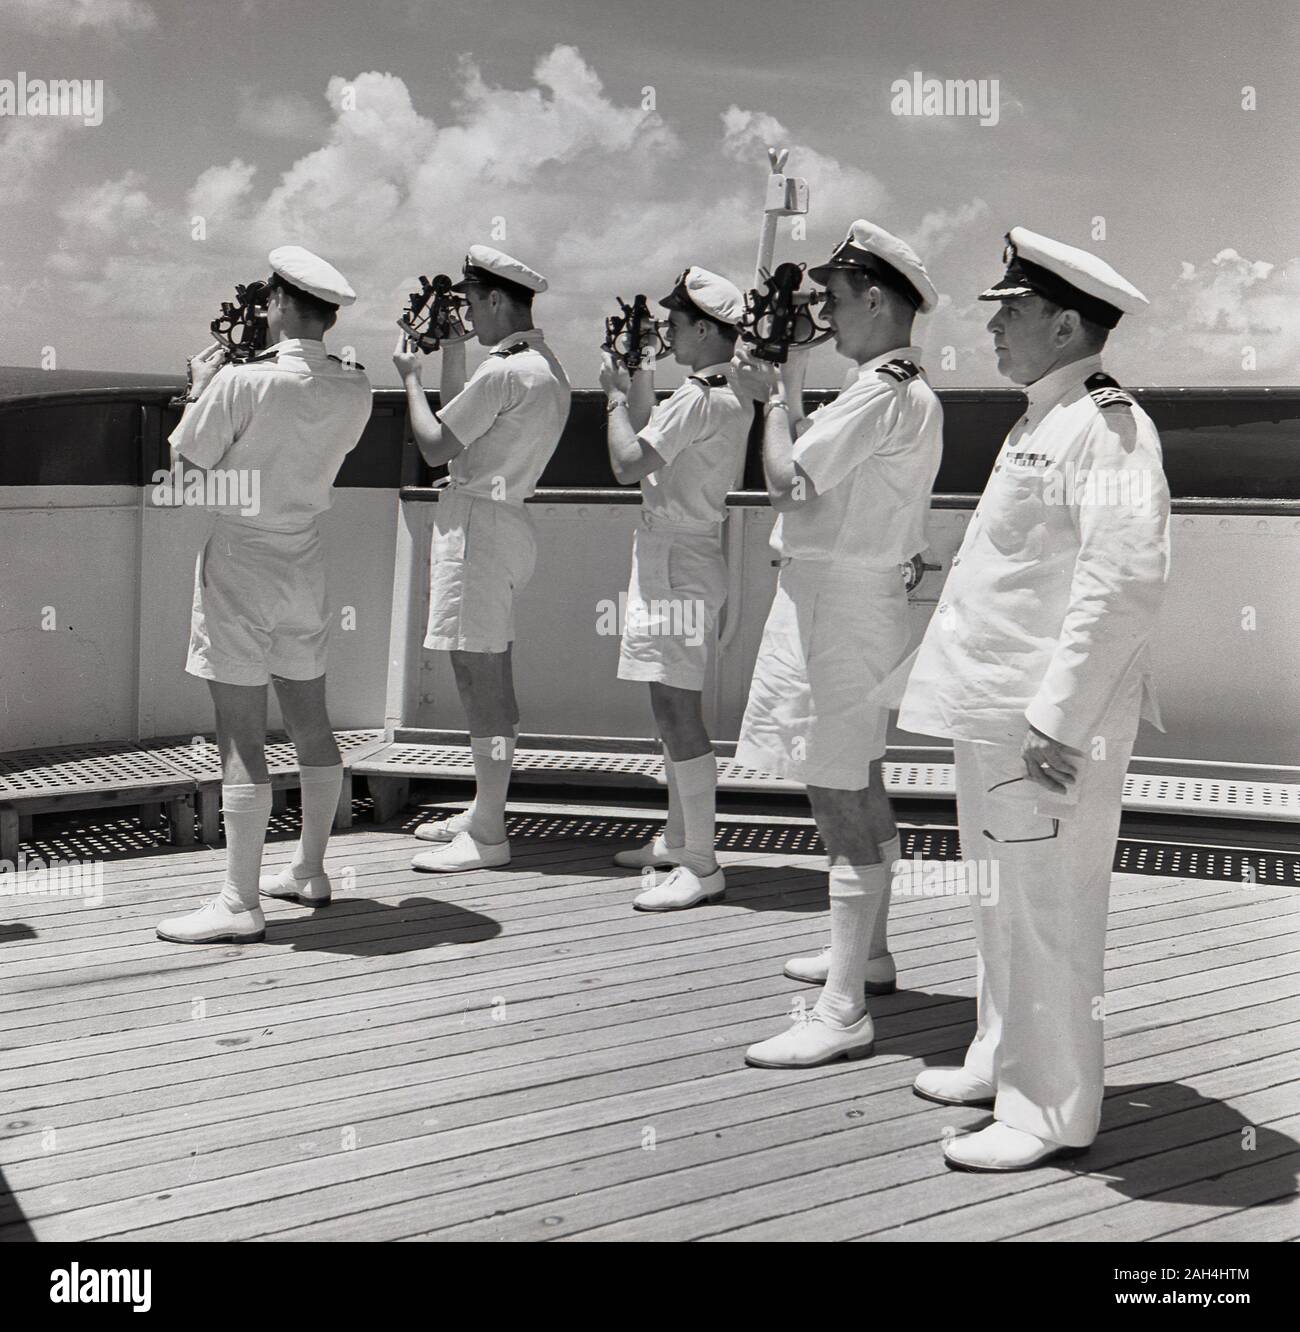 1950s, historical, a group of four uniformed ship's navigators standing out on the deck of a steamship using sextants, overseen by ship's captain. Sextants are maritime measuring instruments used to determine the angle between the horizon and a celestial body such as the sun, moon or a star. Stock Photo